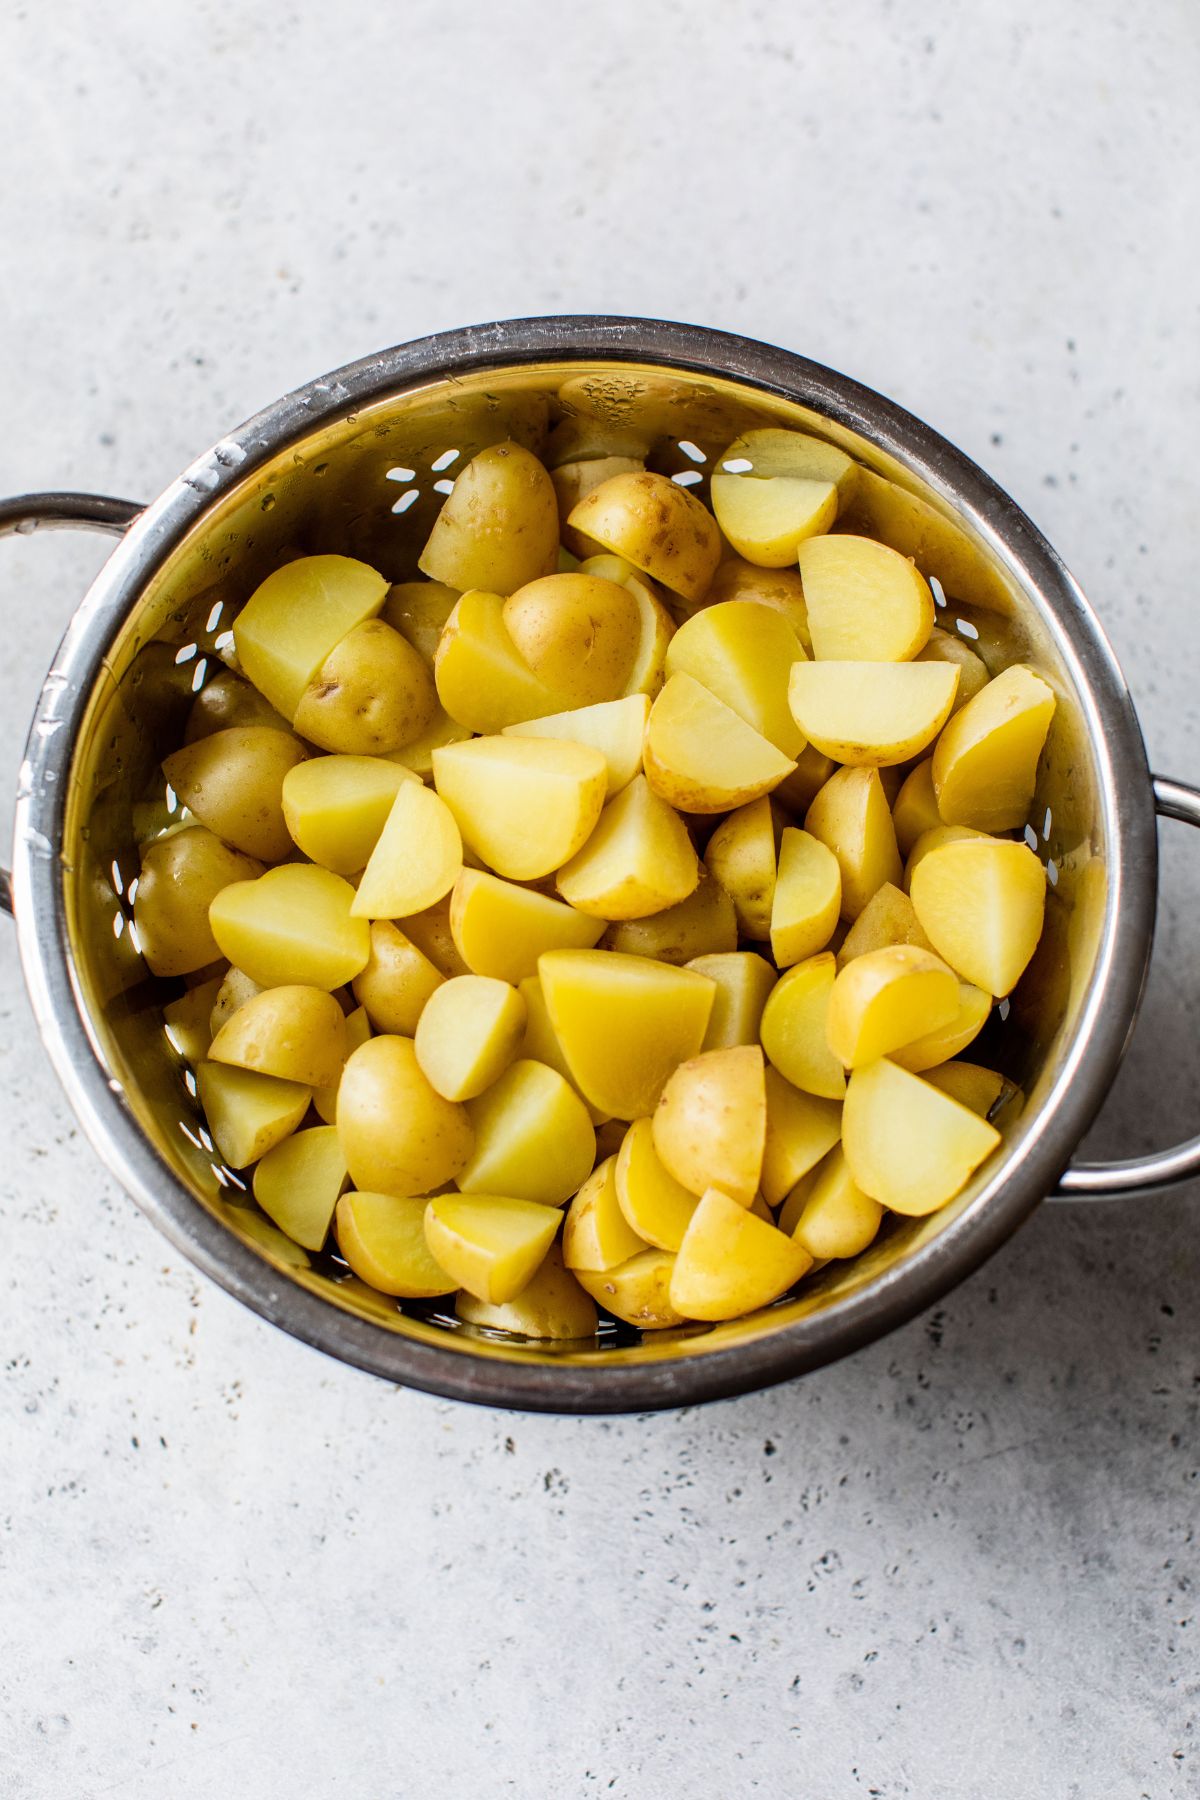 Draining quartered potatoes in a colander.